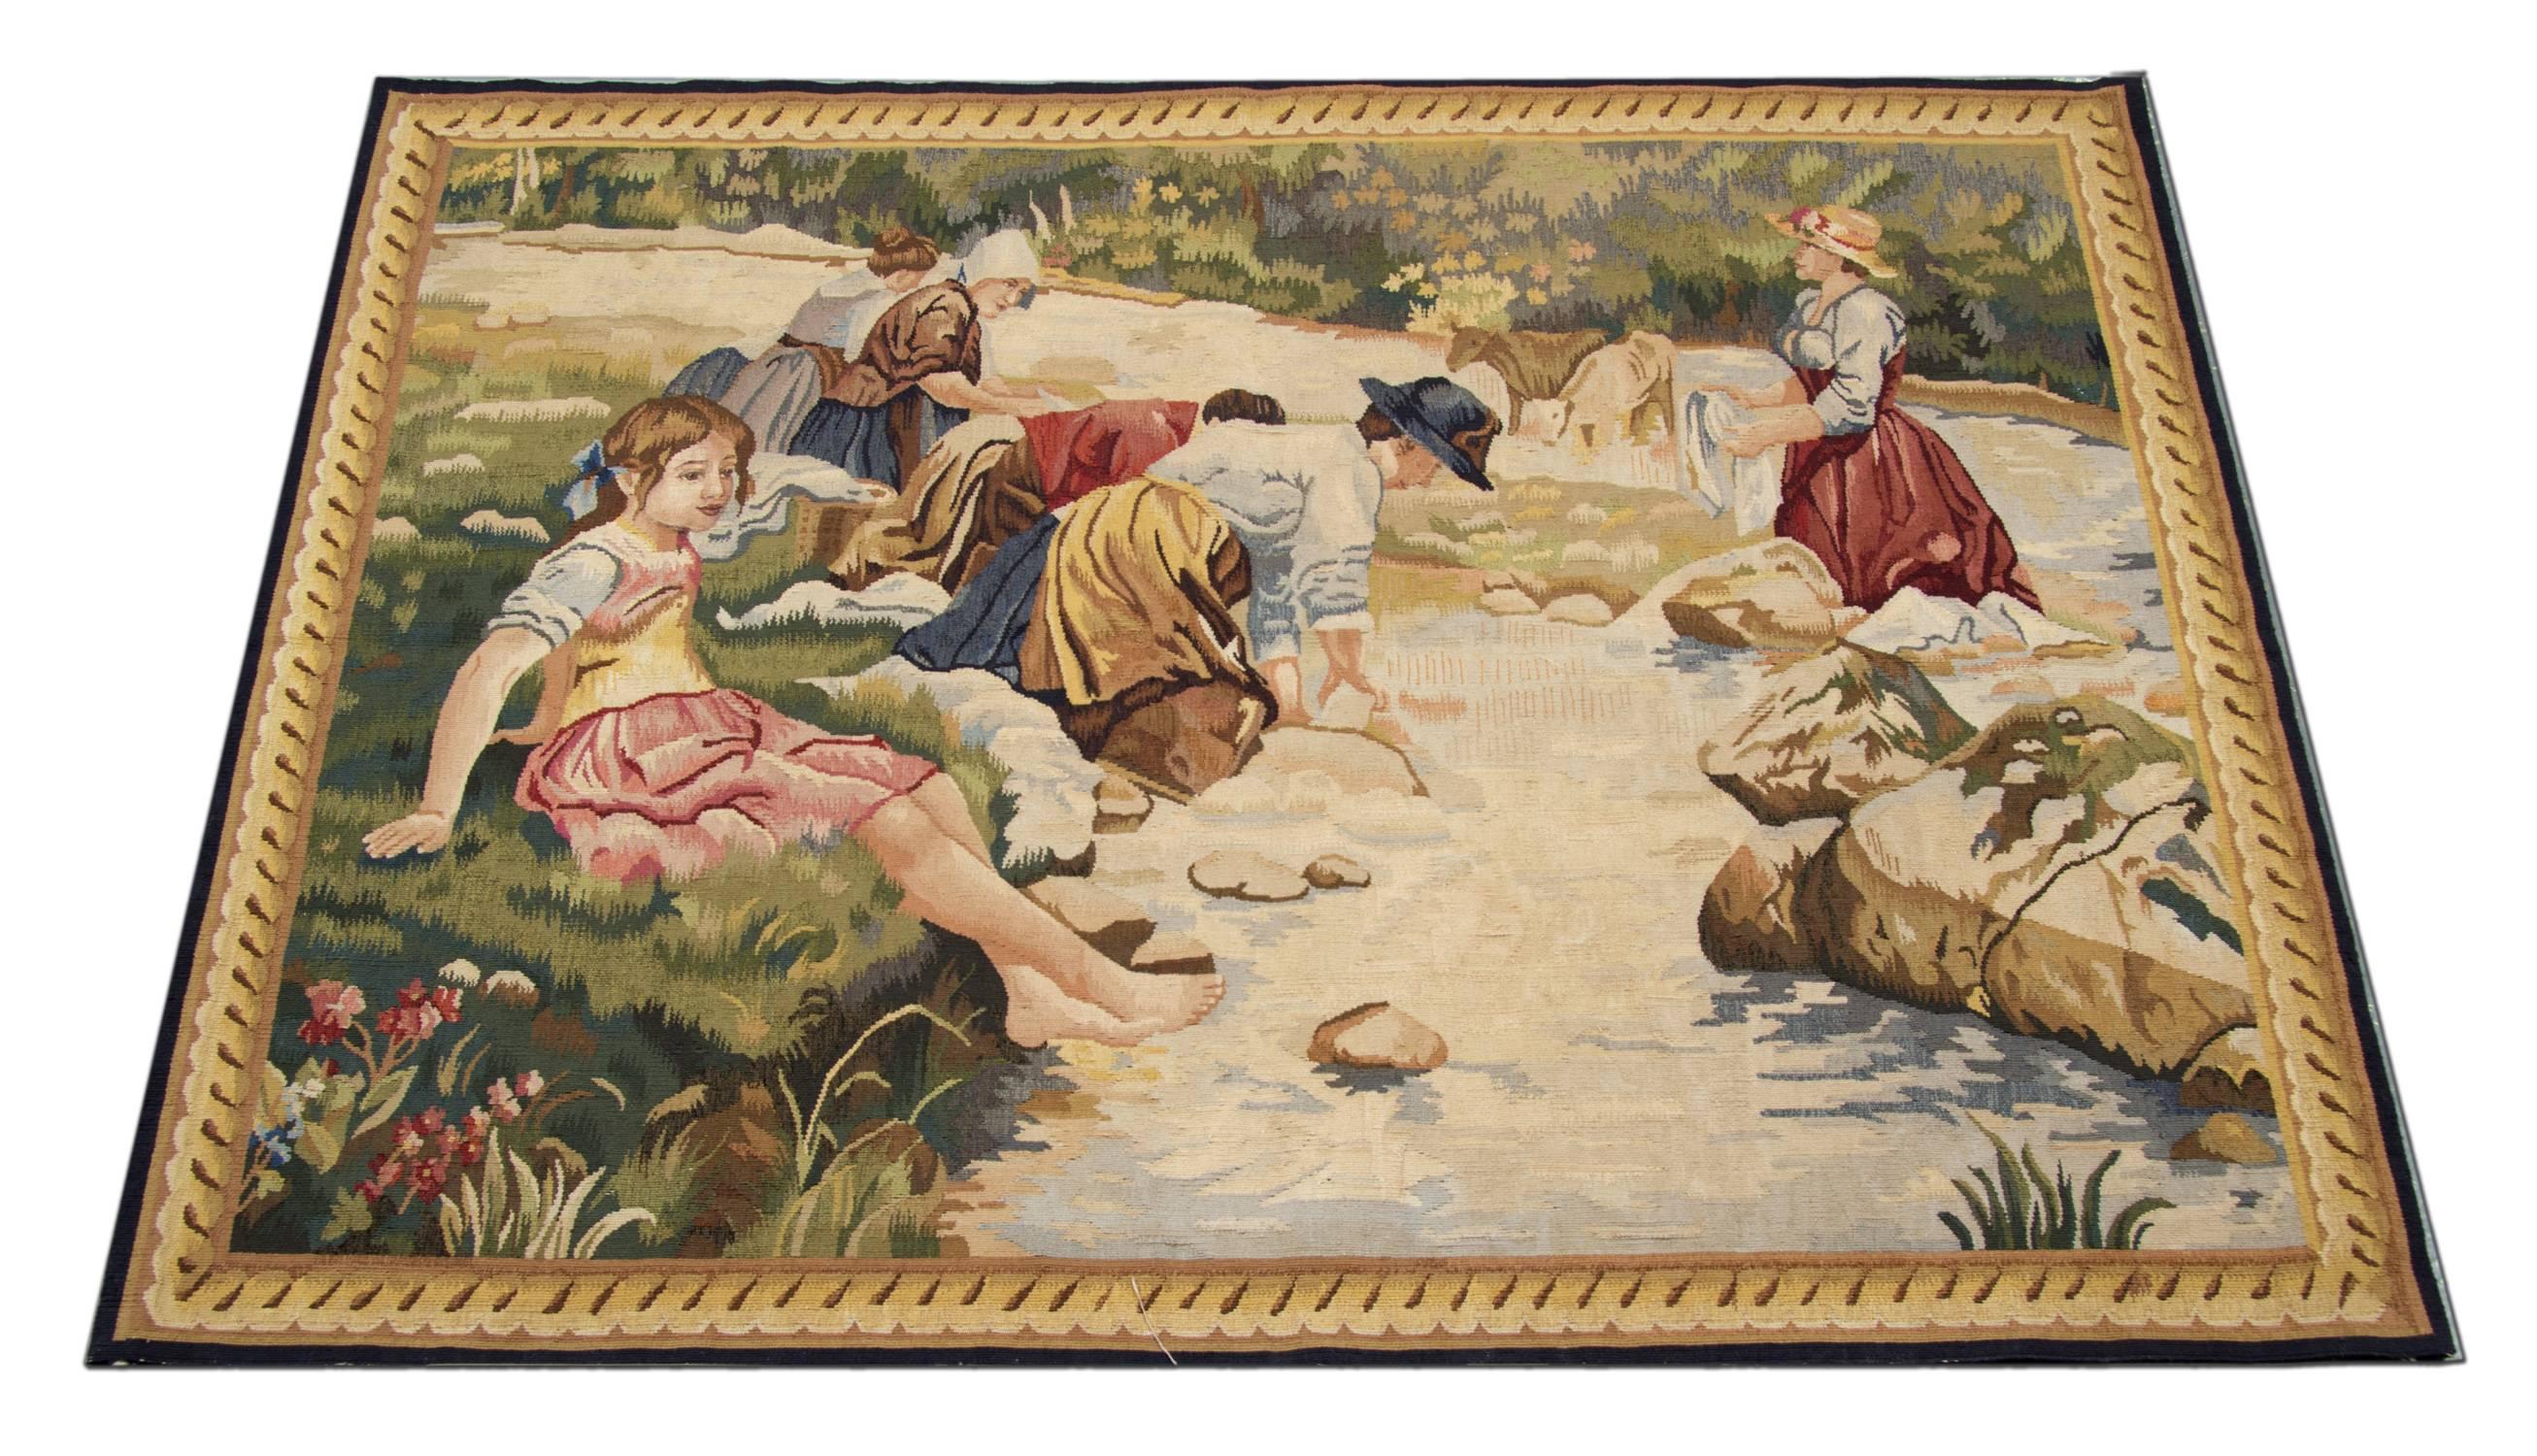 This fine needlepoint features a fantastic river scene with women washing clothes and a young girl dipping her toes. The detail in this handwoven needlepoint is intricate and makes the perfect accent accessory. 
Woven with hand-spun wool which has